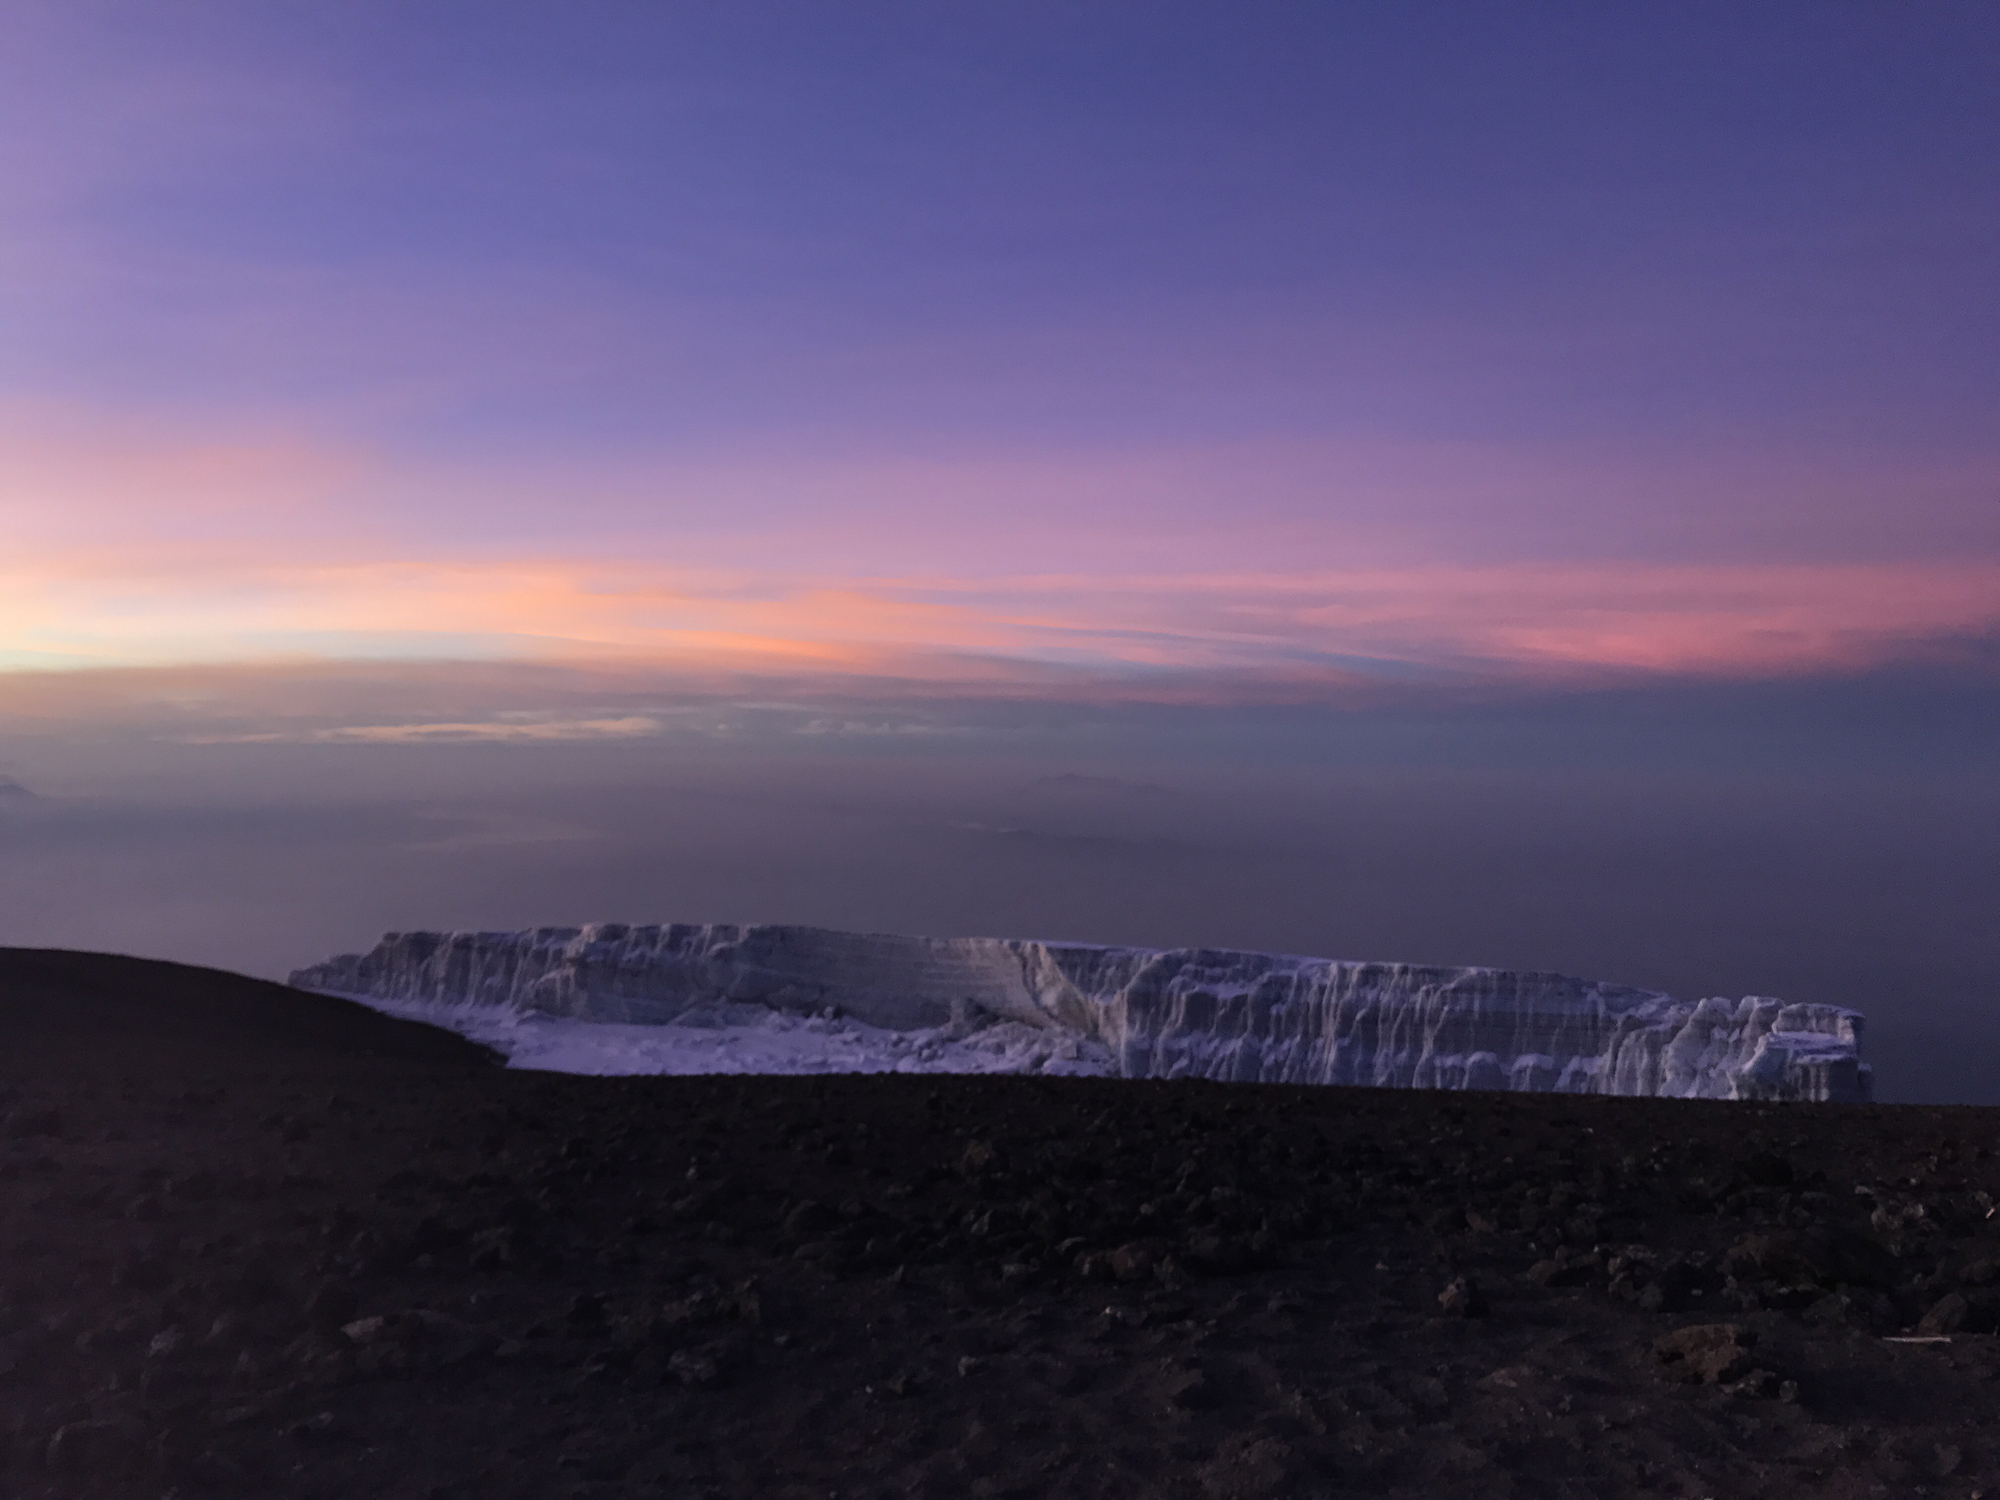 View from the top of Kilimanjaro - Happy New Year!